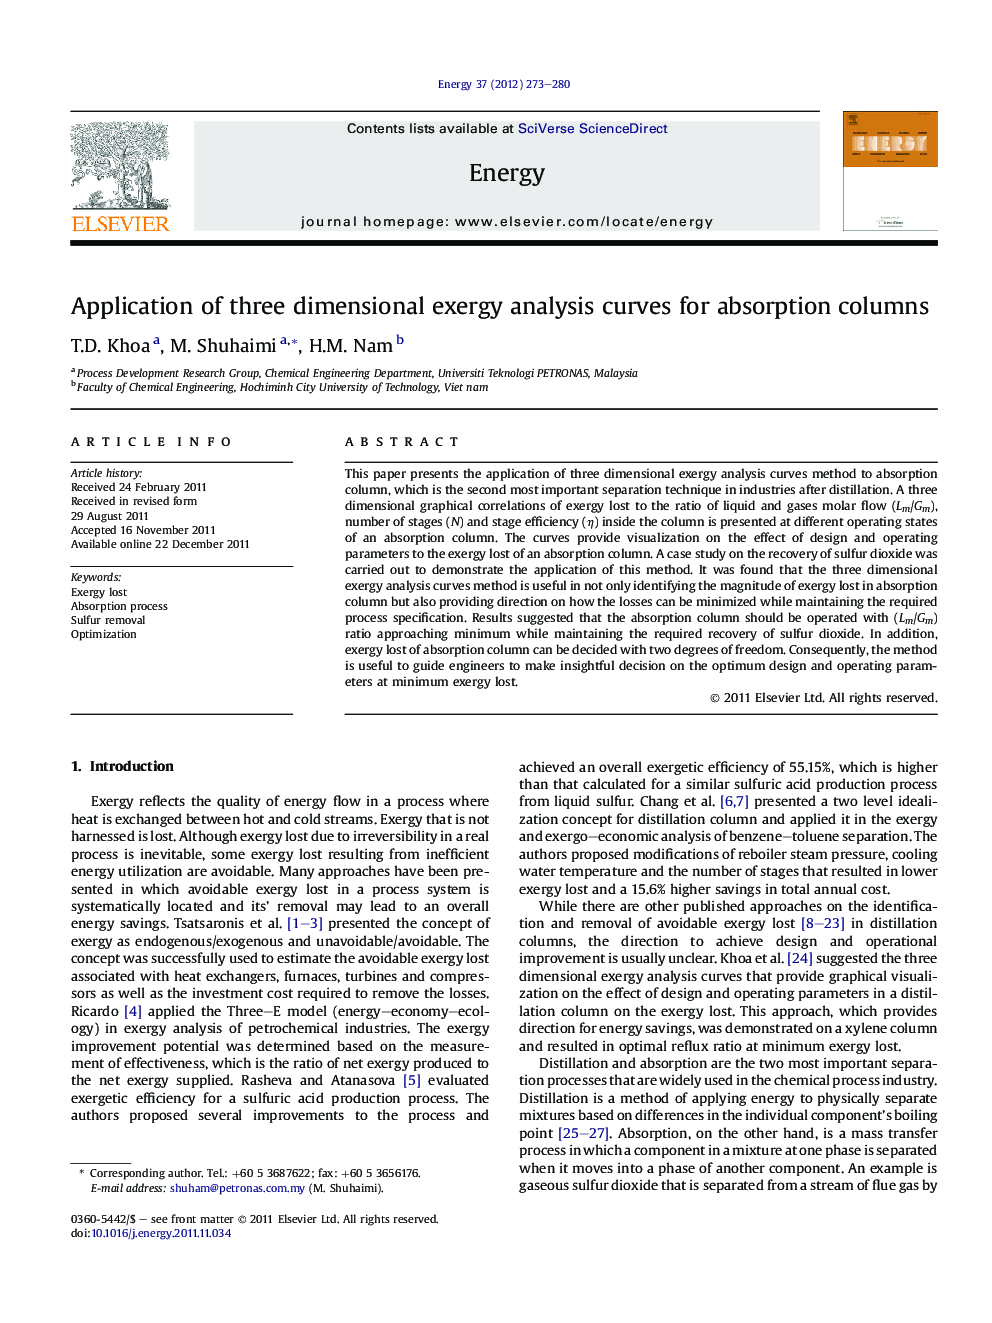 Application of three dimensional exergy analysis curves for absorption columns